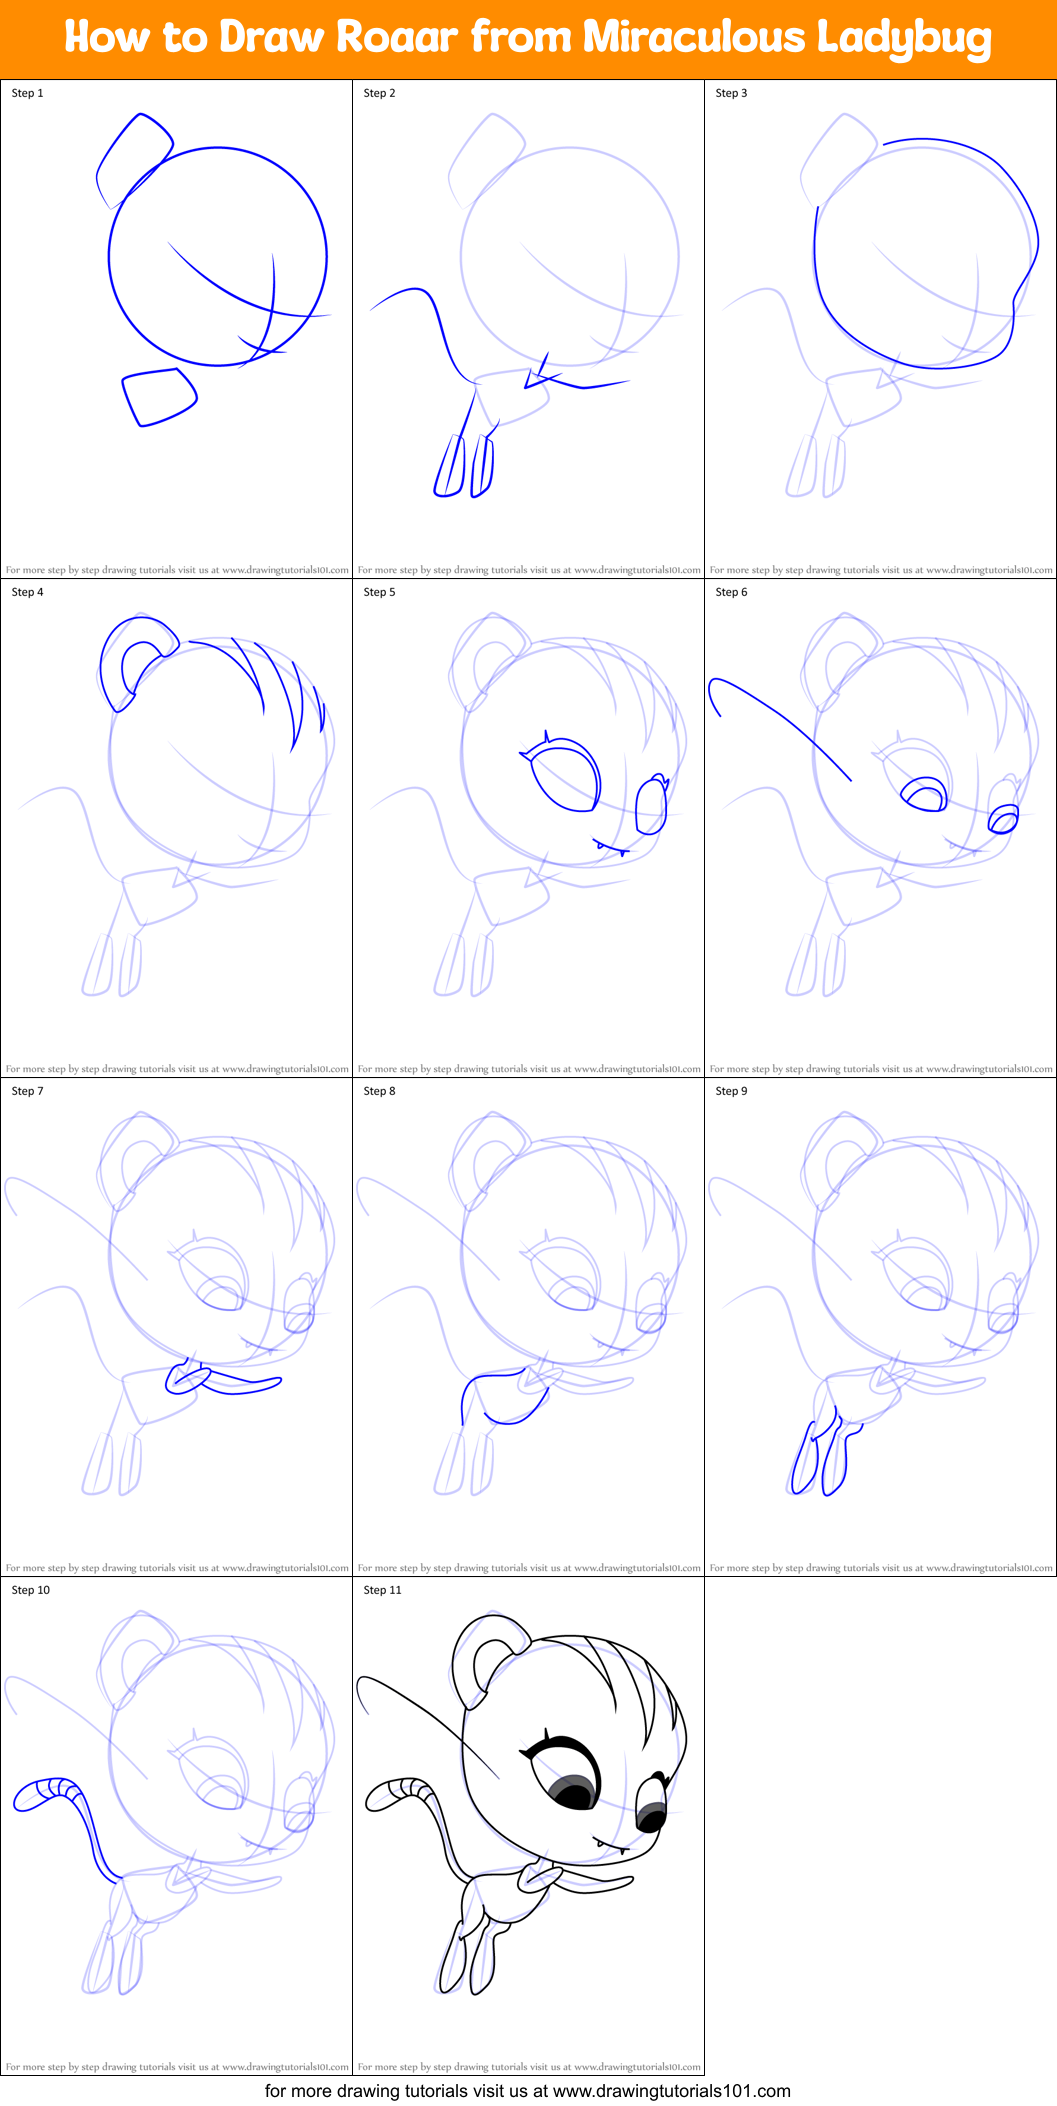 How to Draw Roaar from Miraculous Ladybug printable step by step